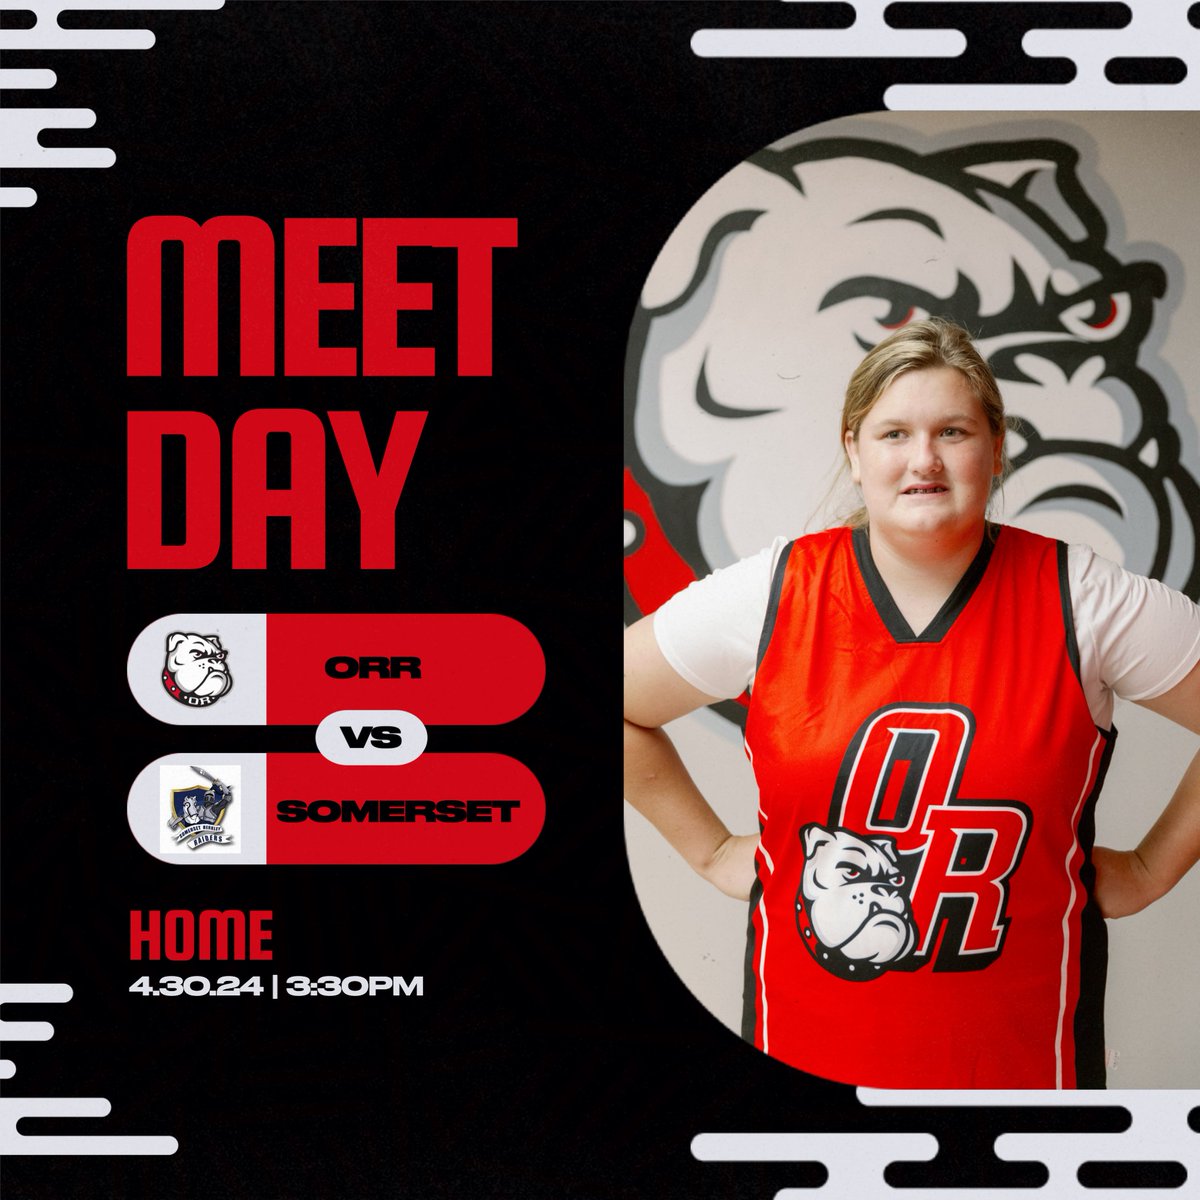 Unified Coed Track has a meet today against Somerset Berkley. At home, starts at 3:30. Go Dogs!